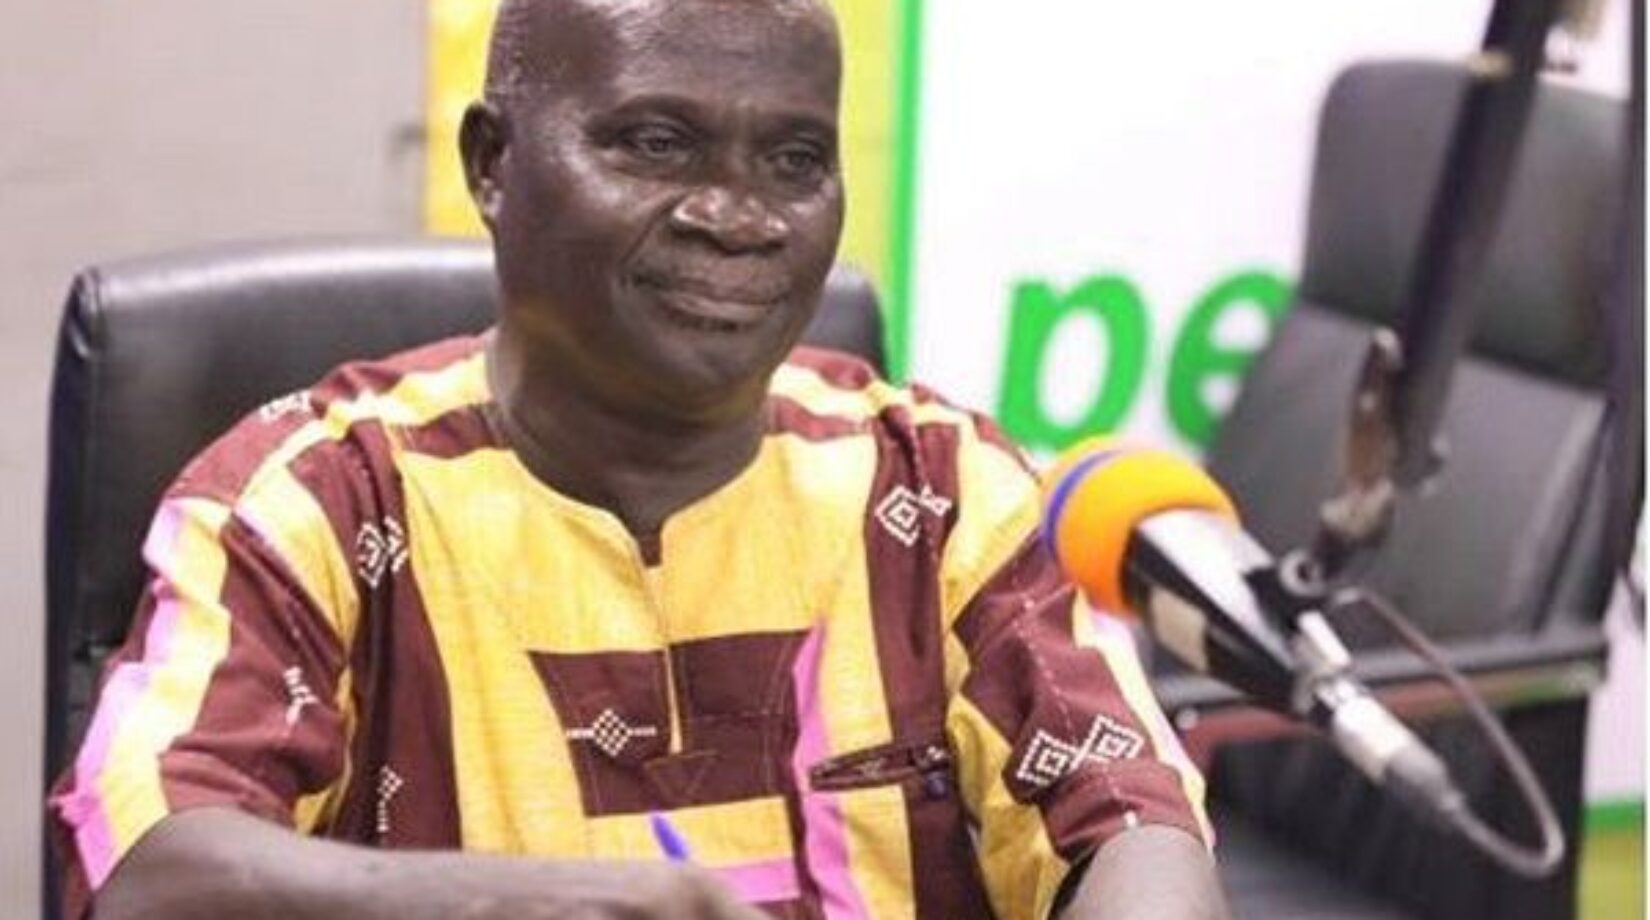 Your ‘Breaking The 8’ Will Be Difficult If This ‘Dumsor’ Problem Stays – Prof Agyekum Warns NPP